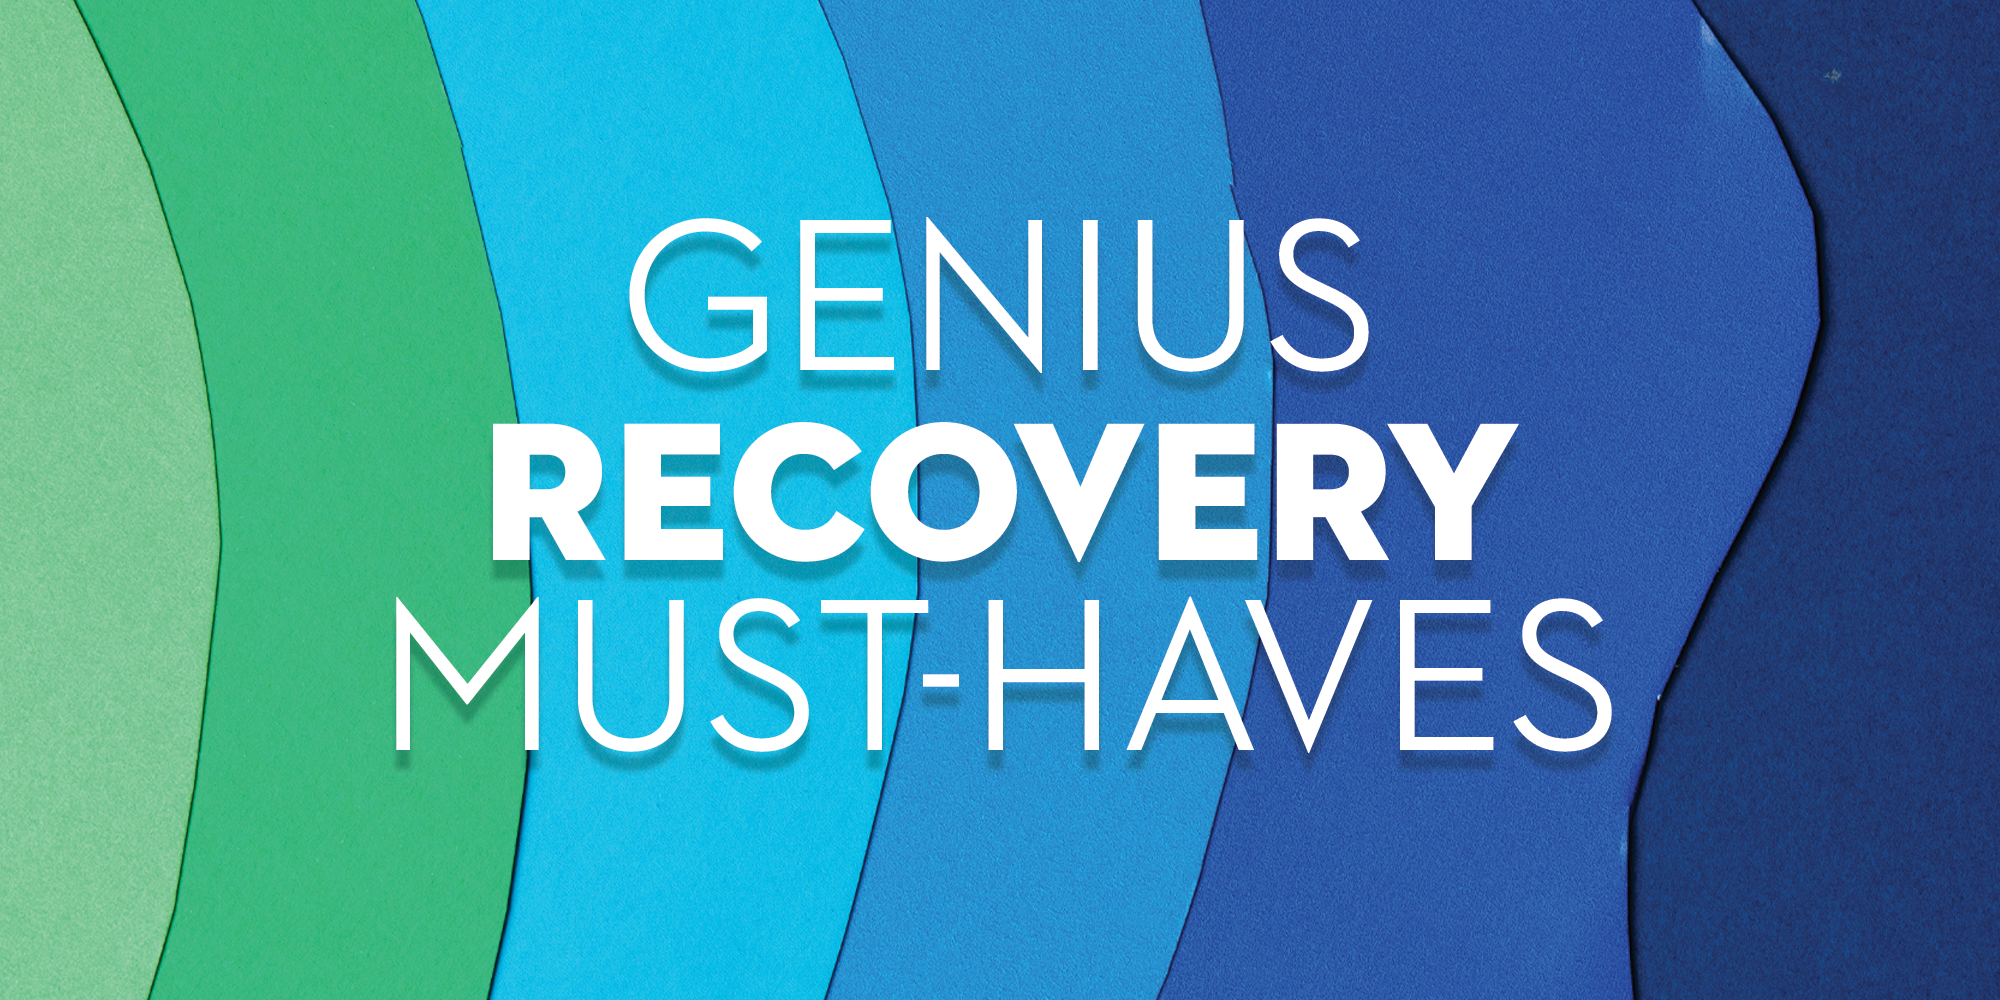 genius recovery must haves